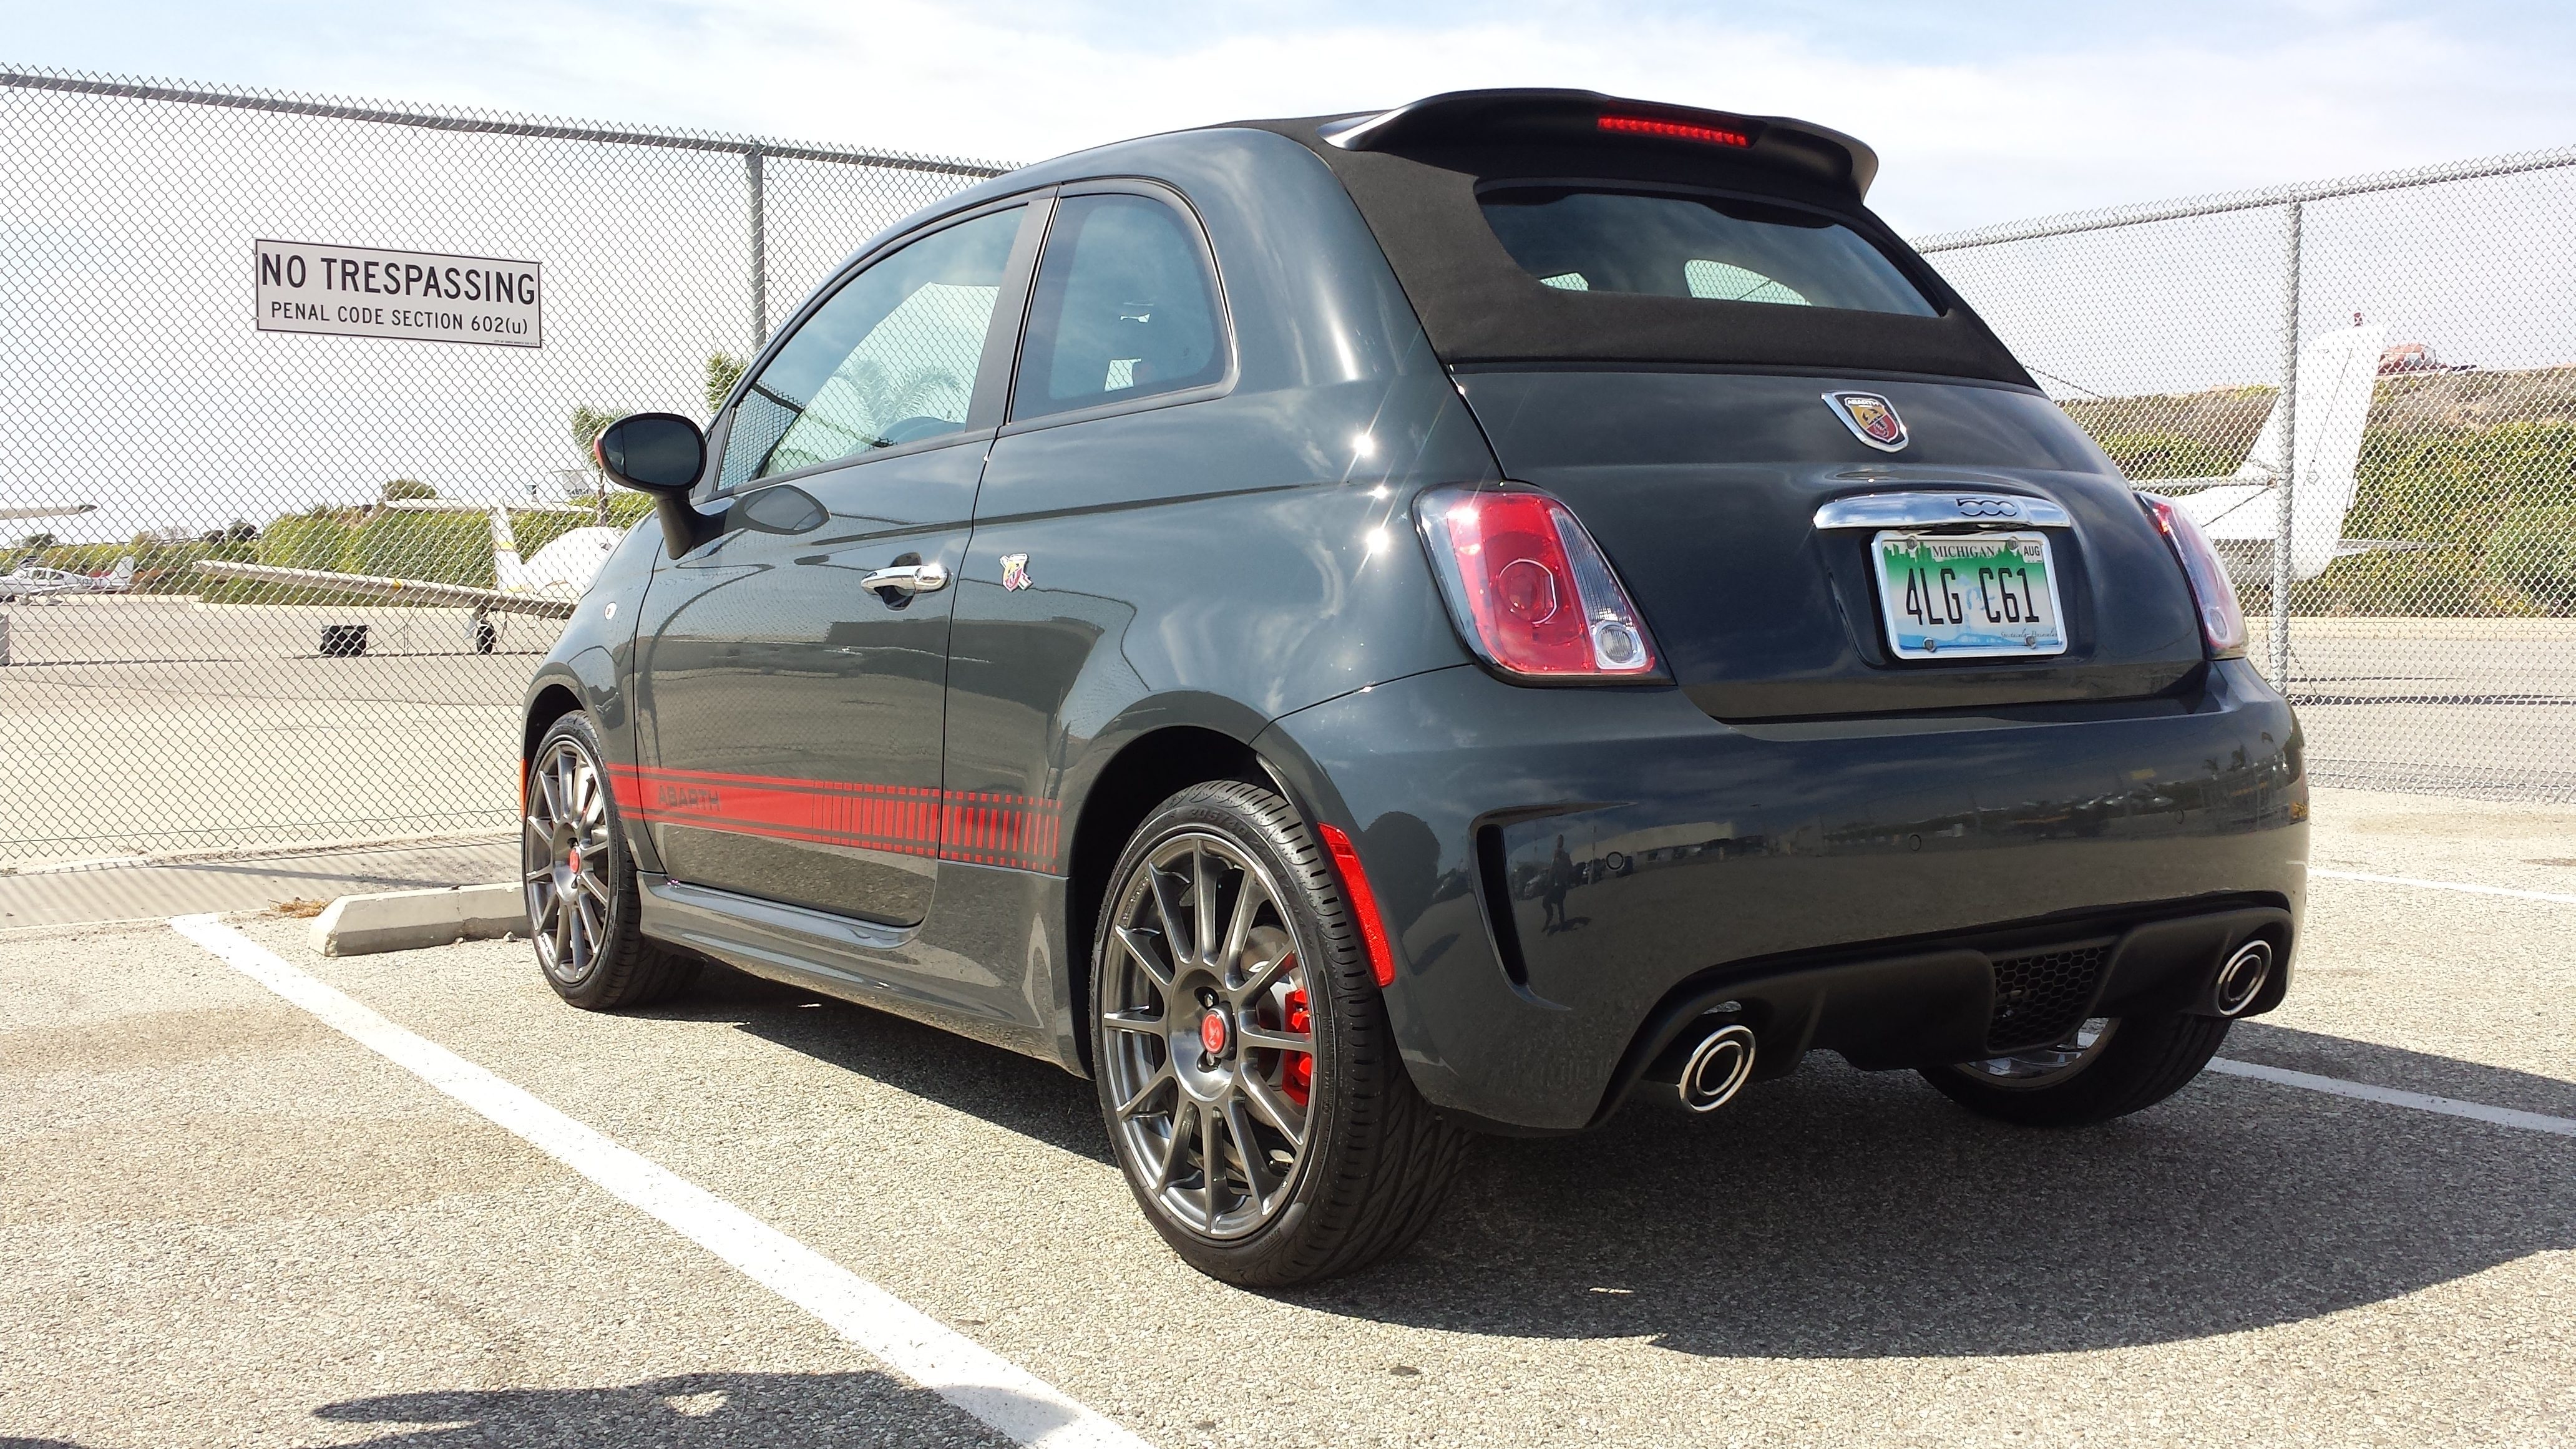 2017 Fiat 500 Abarth: What You Need to Know